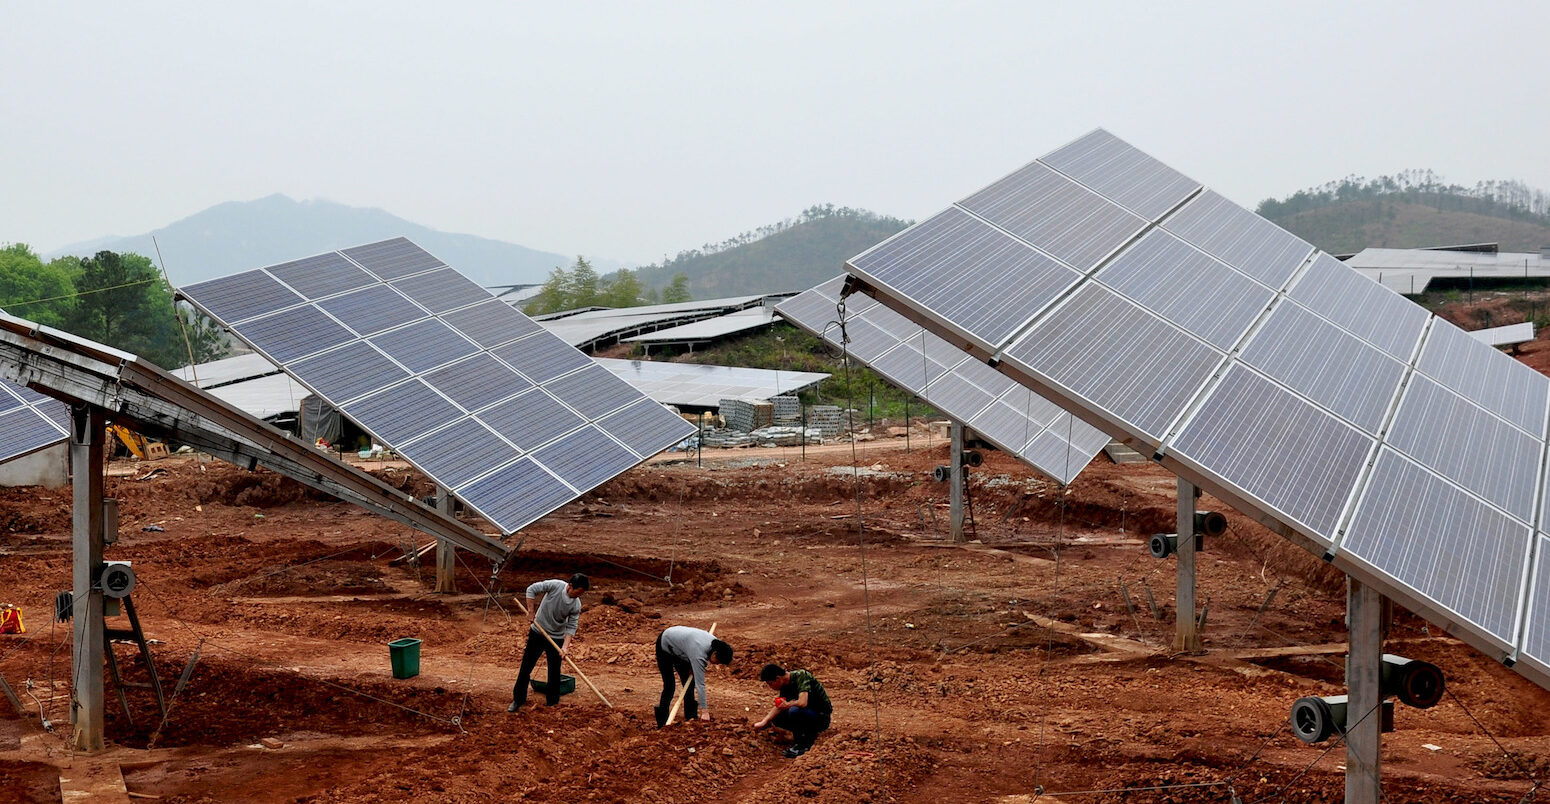 Villagers in Jiangxi province, China, plant peanuts in the open space of a 20MW solar photovoltaic power station.